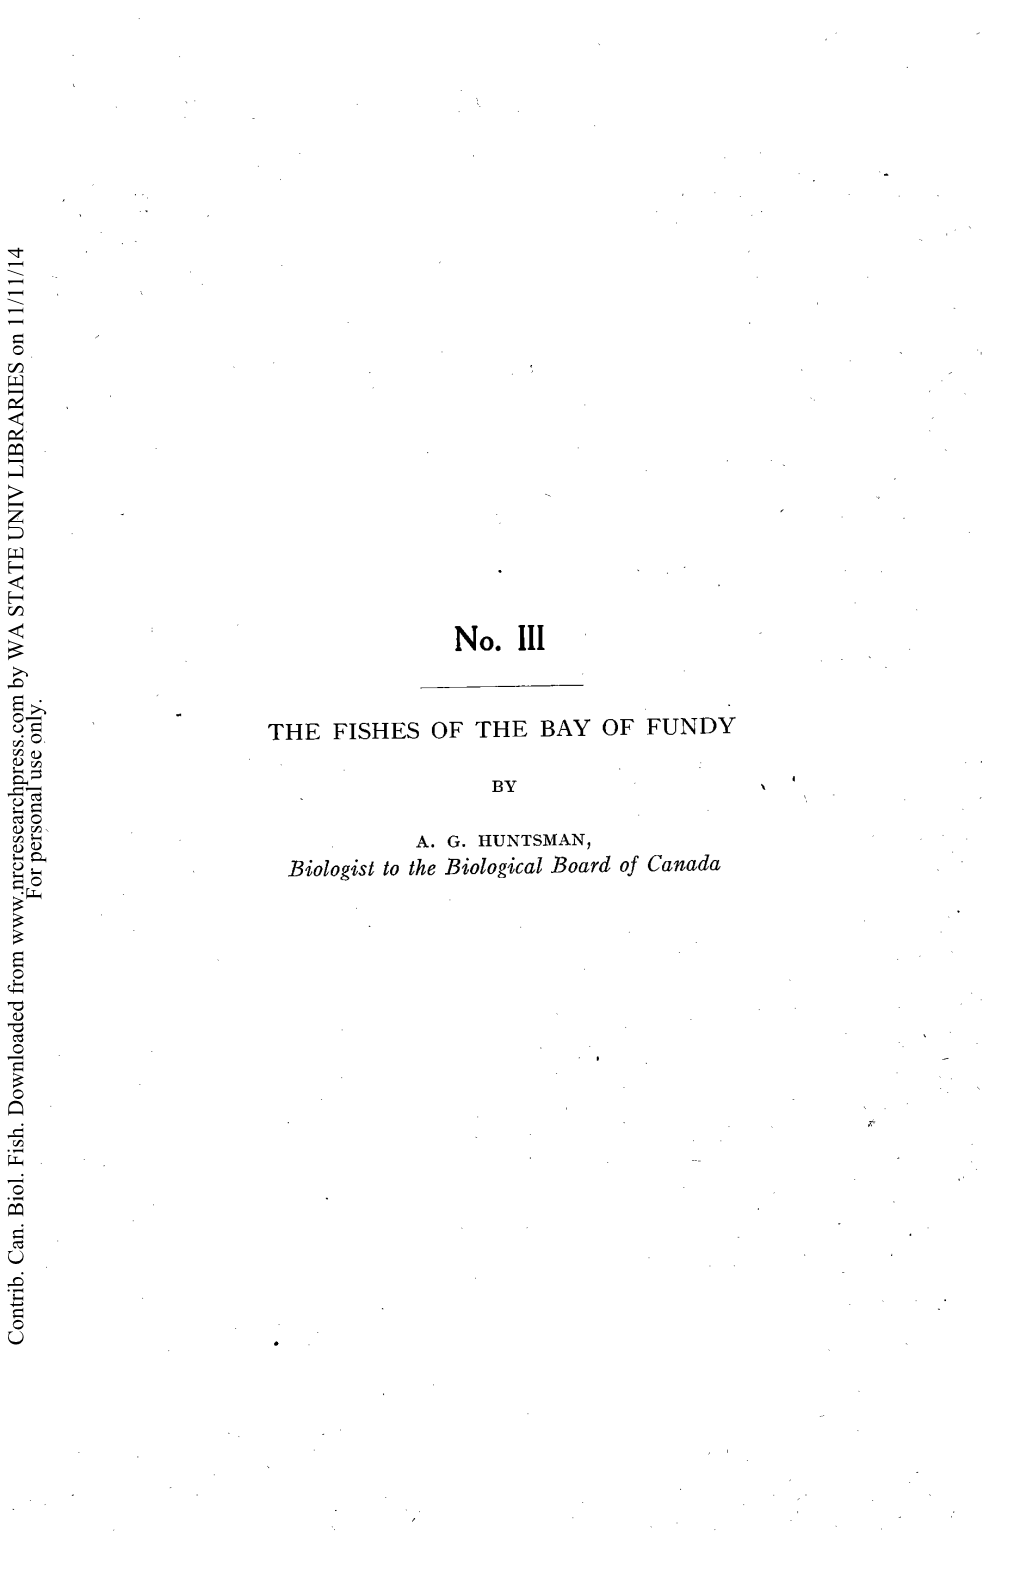 No. III: the FISHES of the BAY of FUNDY